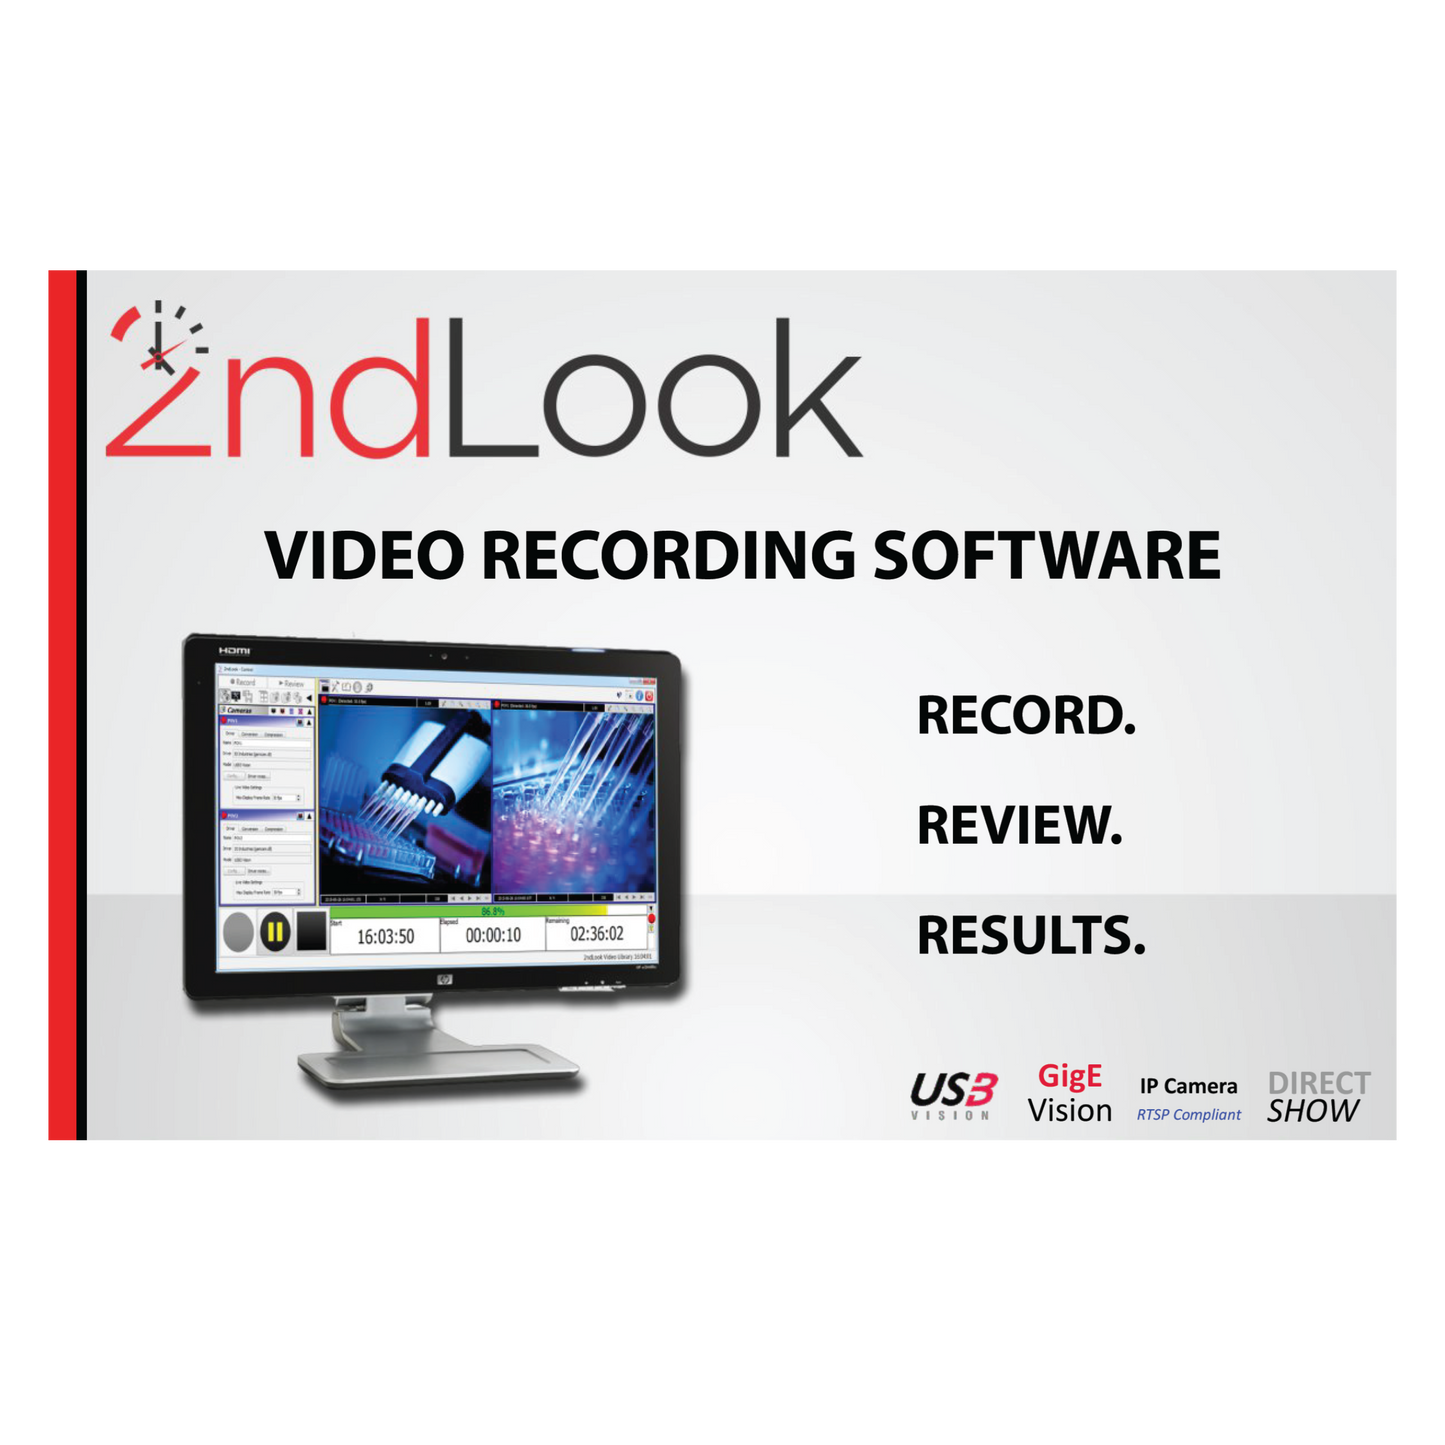 Support for 2ndlook Camera Software